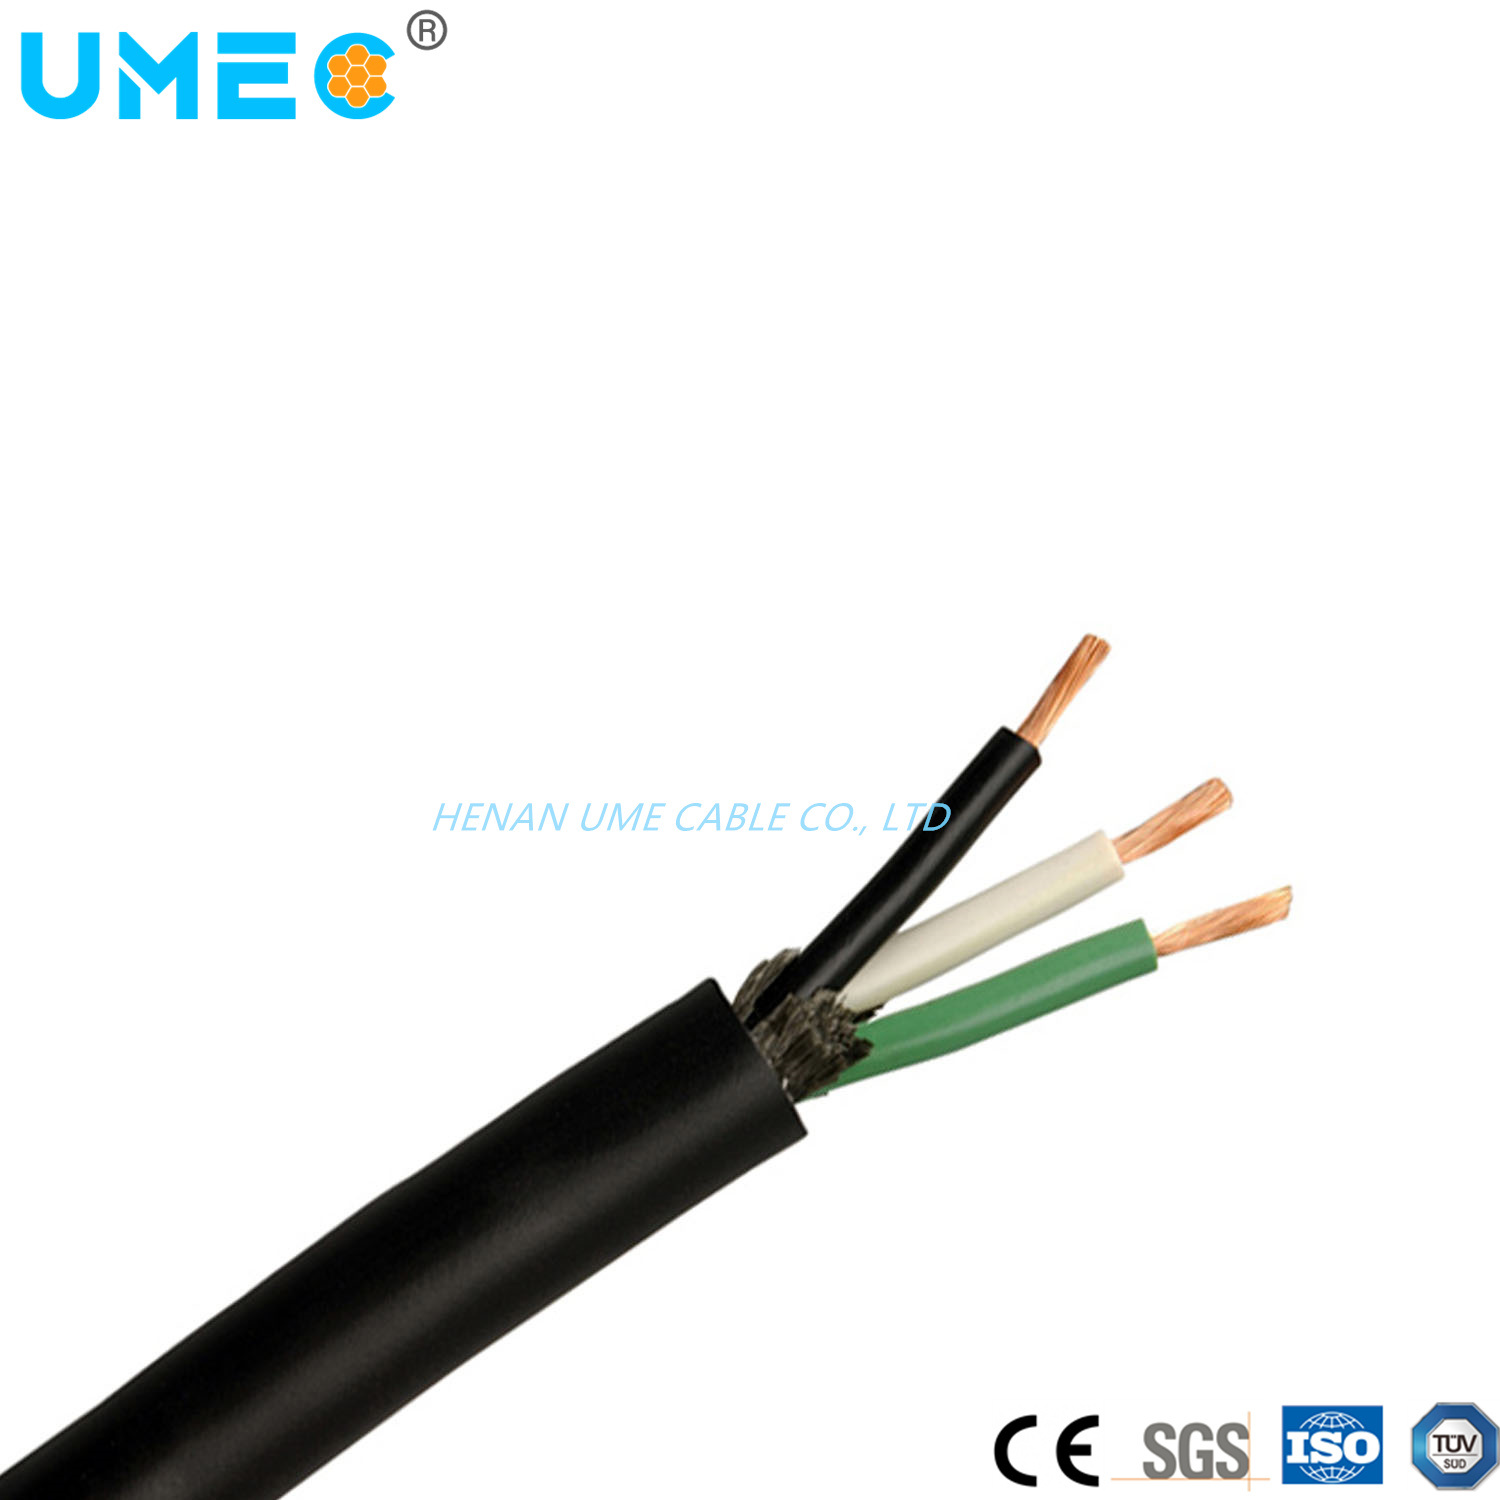 The Factory Price 600V Copper Conductor Flexible 3X16AWG 3X14AWG 3X12AWG 3X10AWG 4X10AWG 4X8AWG So Soow Rubber Cable Price